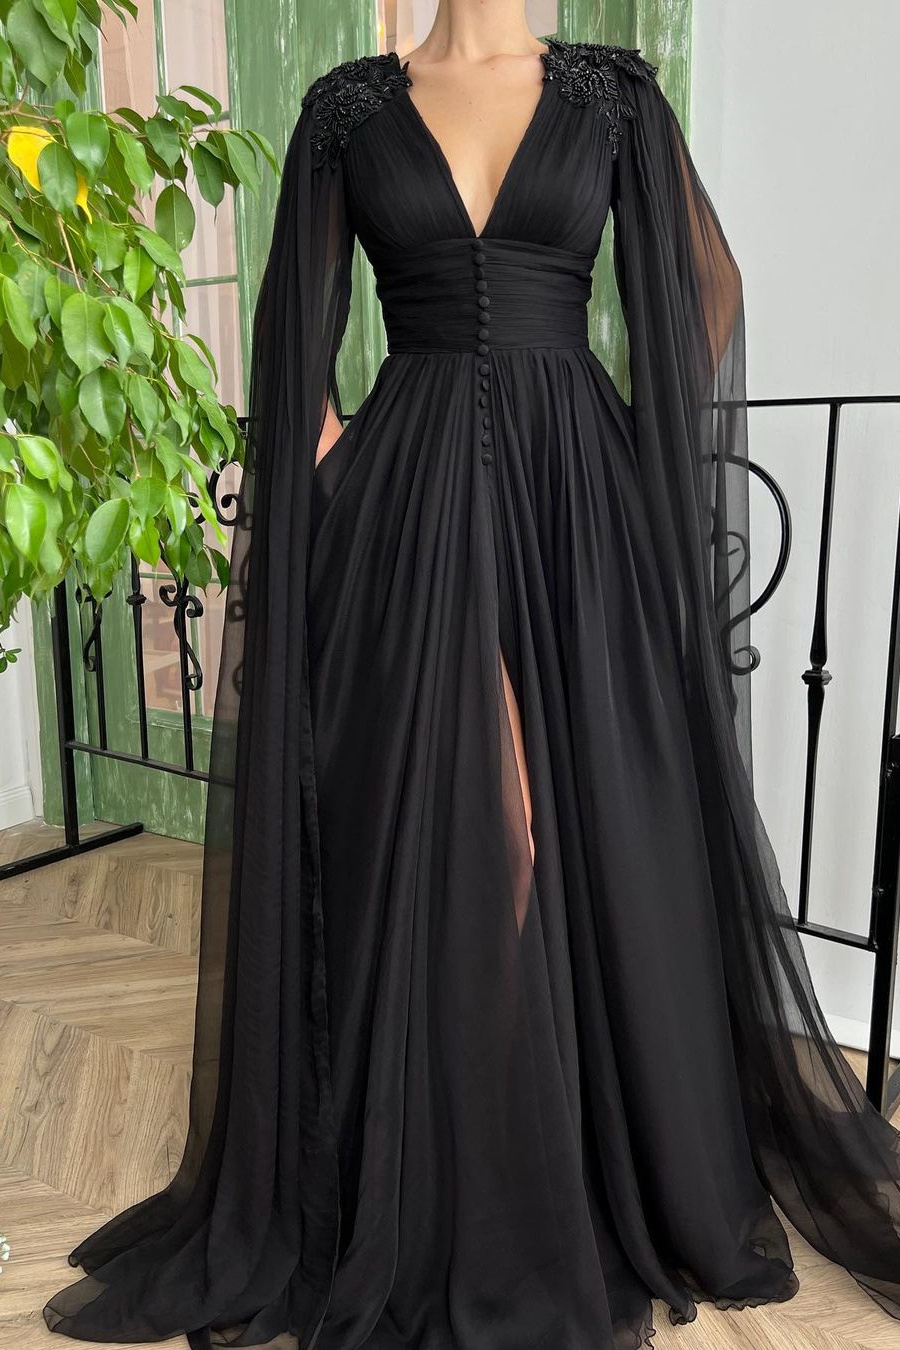 Luluslly Black Ruffle Sleeves Prom Dress Long Slit With Buttons